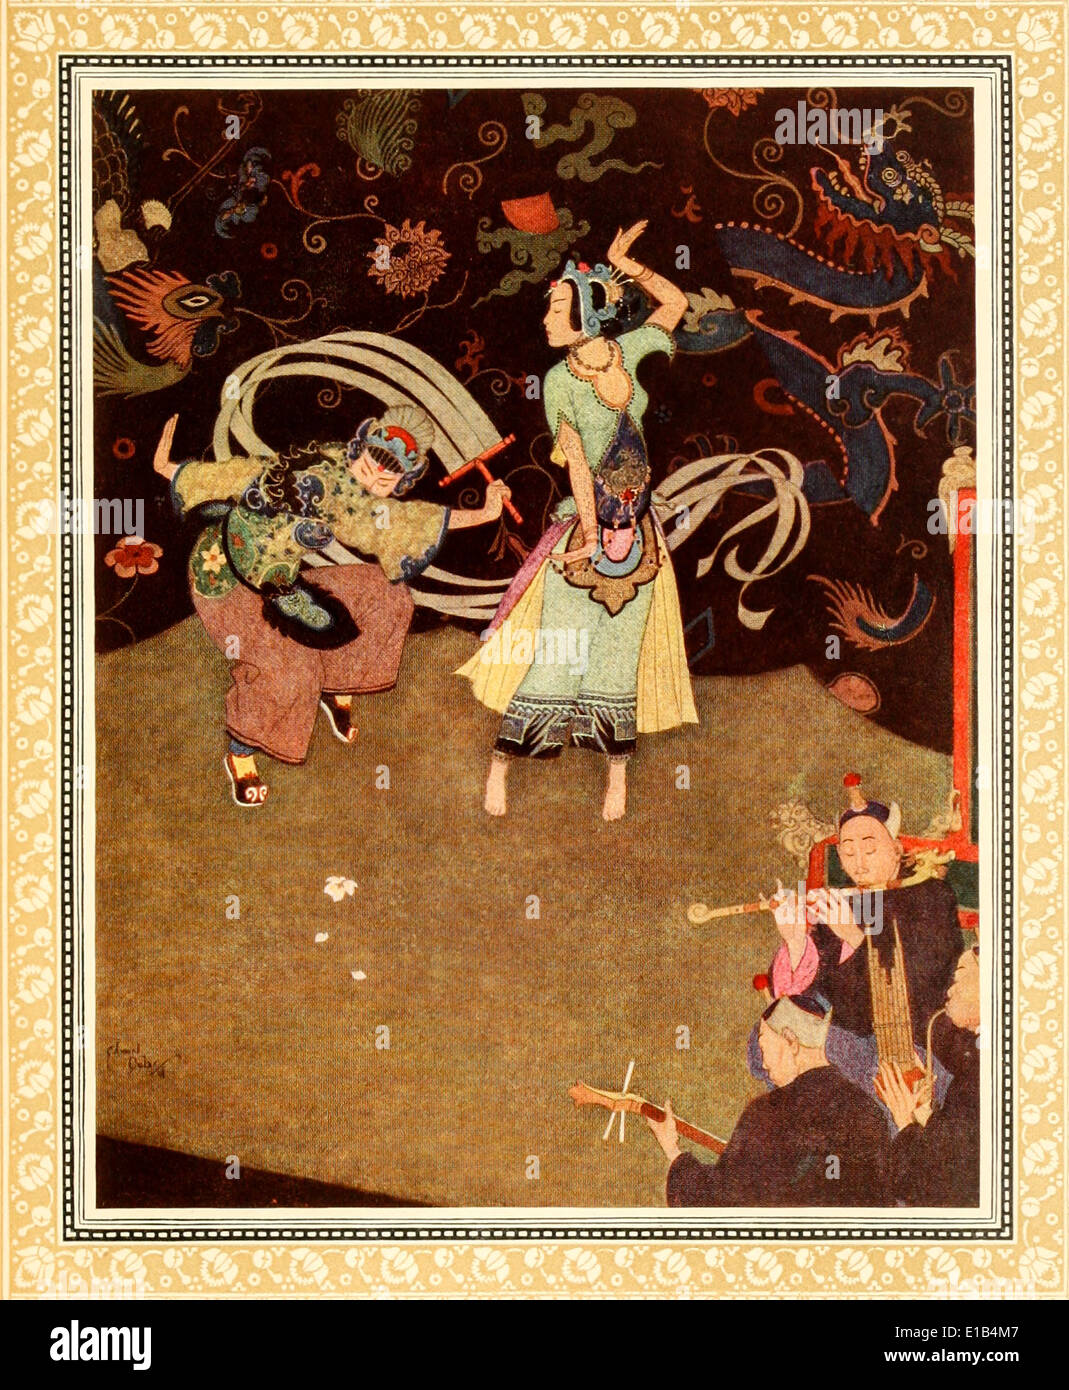 Edmund Dulac (1882-1953) illustration from ‘Sinbad the Sailor & Other Stories from the Arabian Nights’. Lady Bedr-el-Buldur Stock Photo